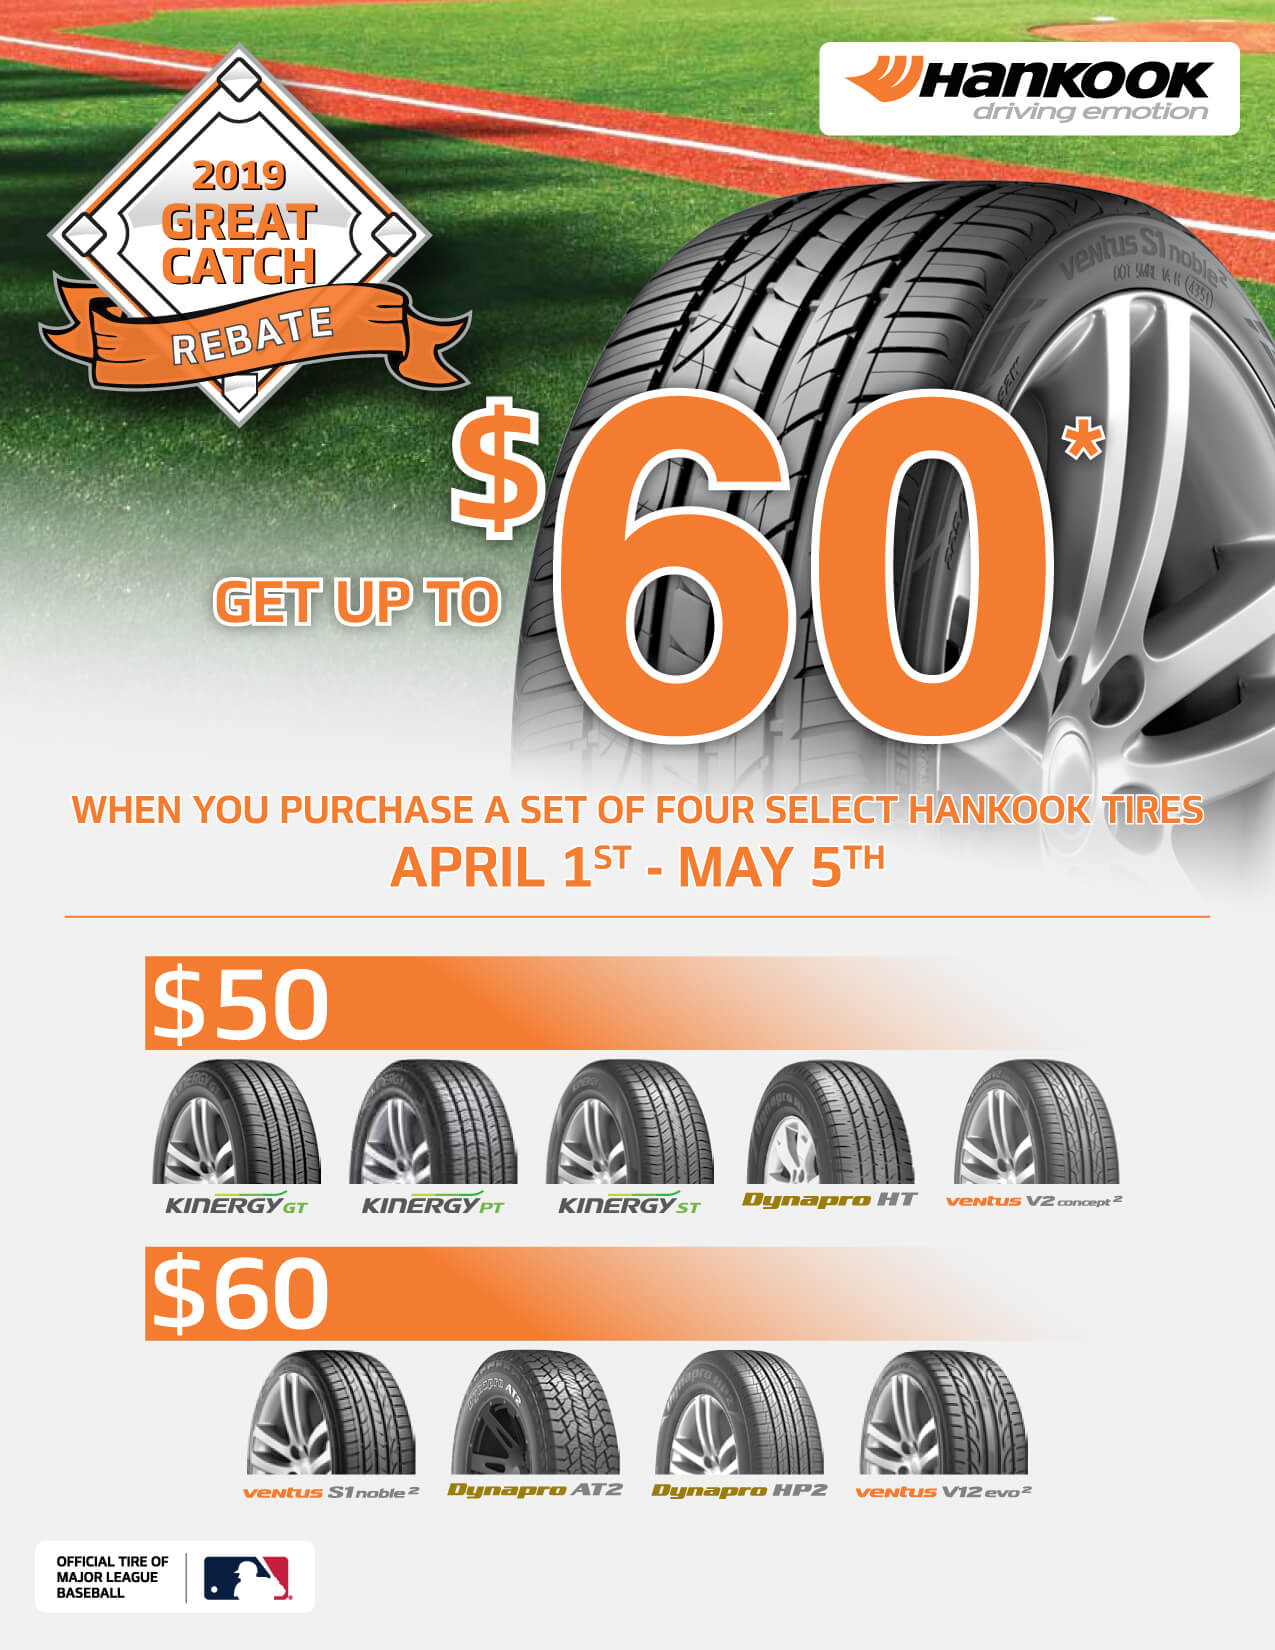 hankook-great-catch-tire-rebate-get-up-to-60-kubly-s-automotive